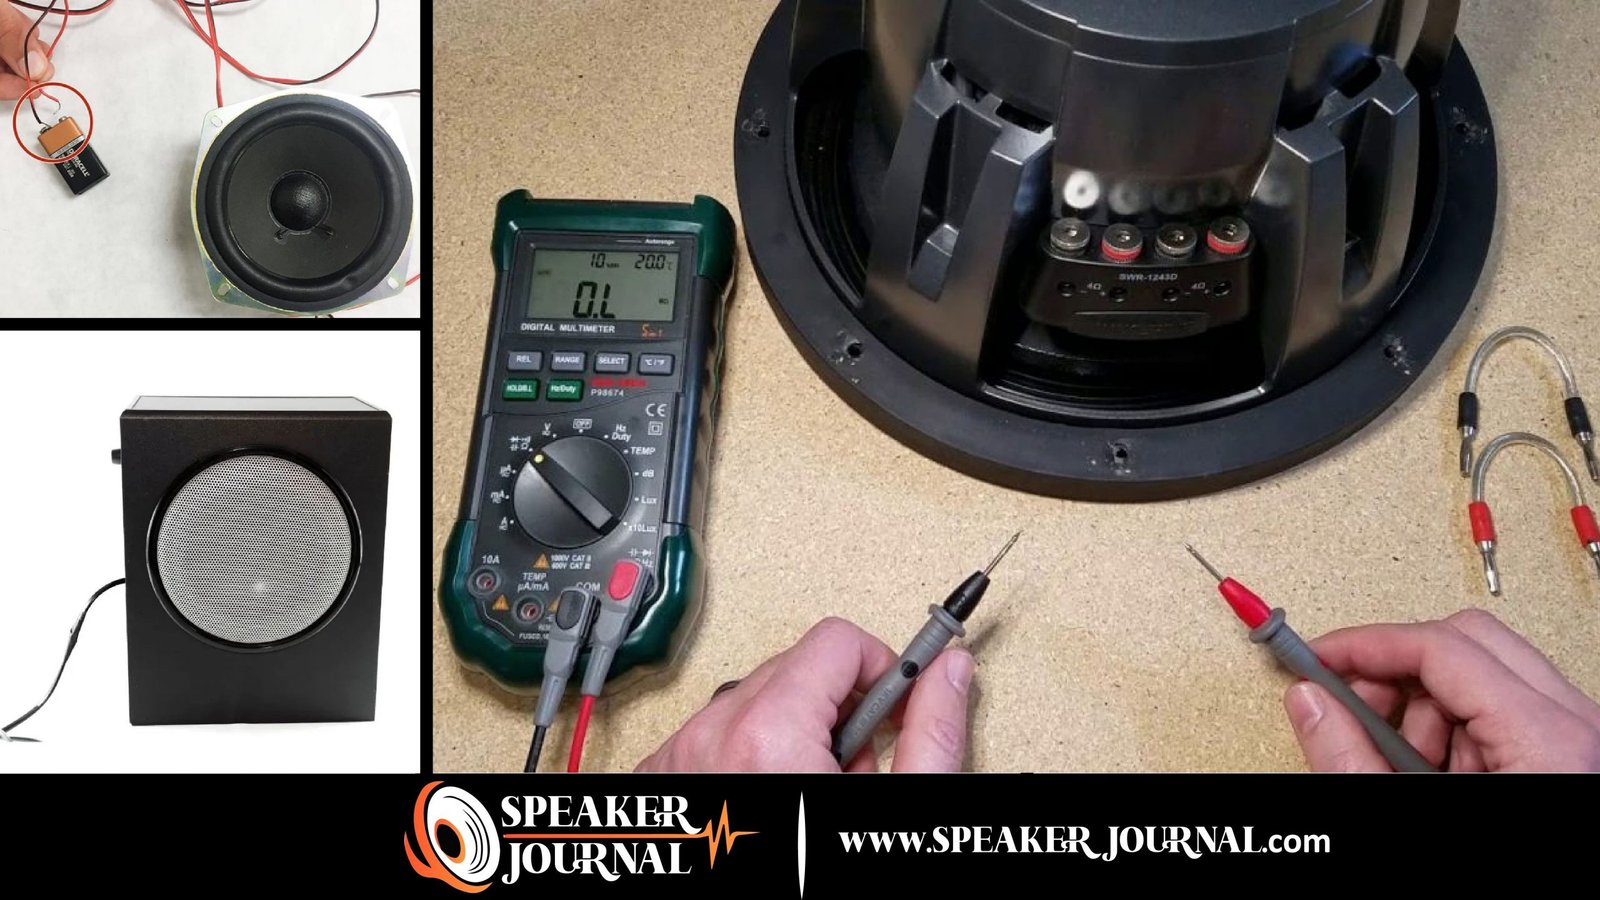 How To Recone A Subwoofer by speakerjournal.com